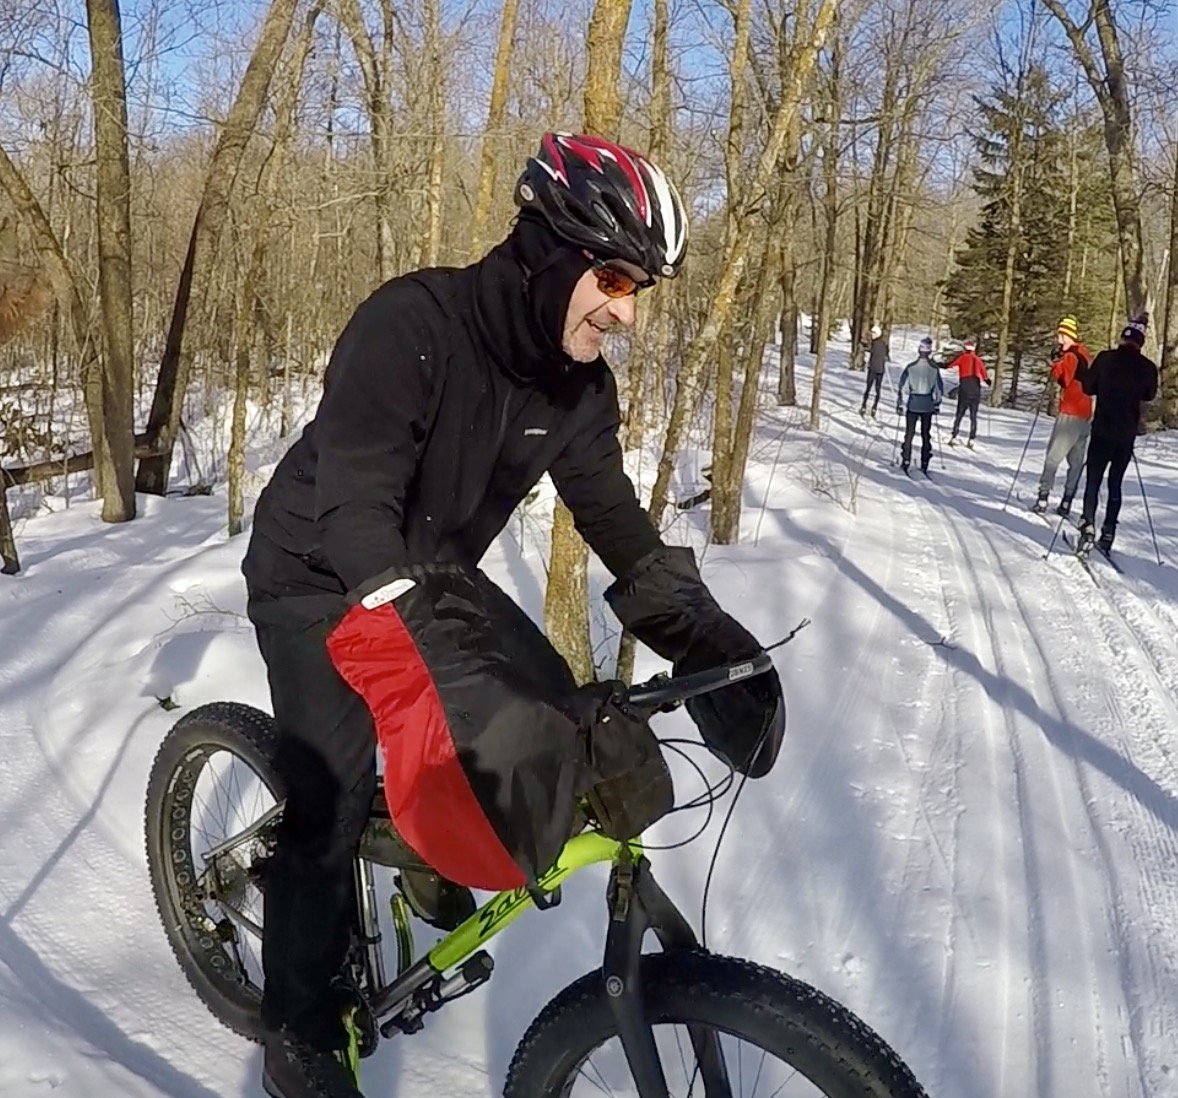 Fat biking on twin lakes singletrack, February 12th, 2017. Great conditions. Best to ride in the morning when firm. Please ride in the morning during warmer temps to preserve the trail conditions. 